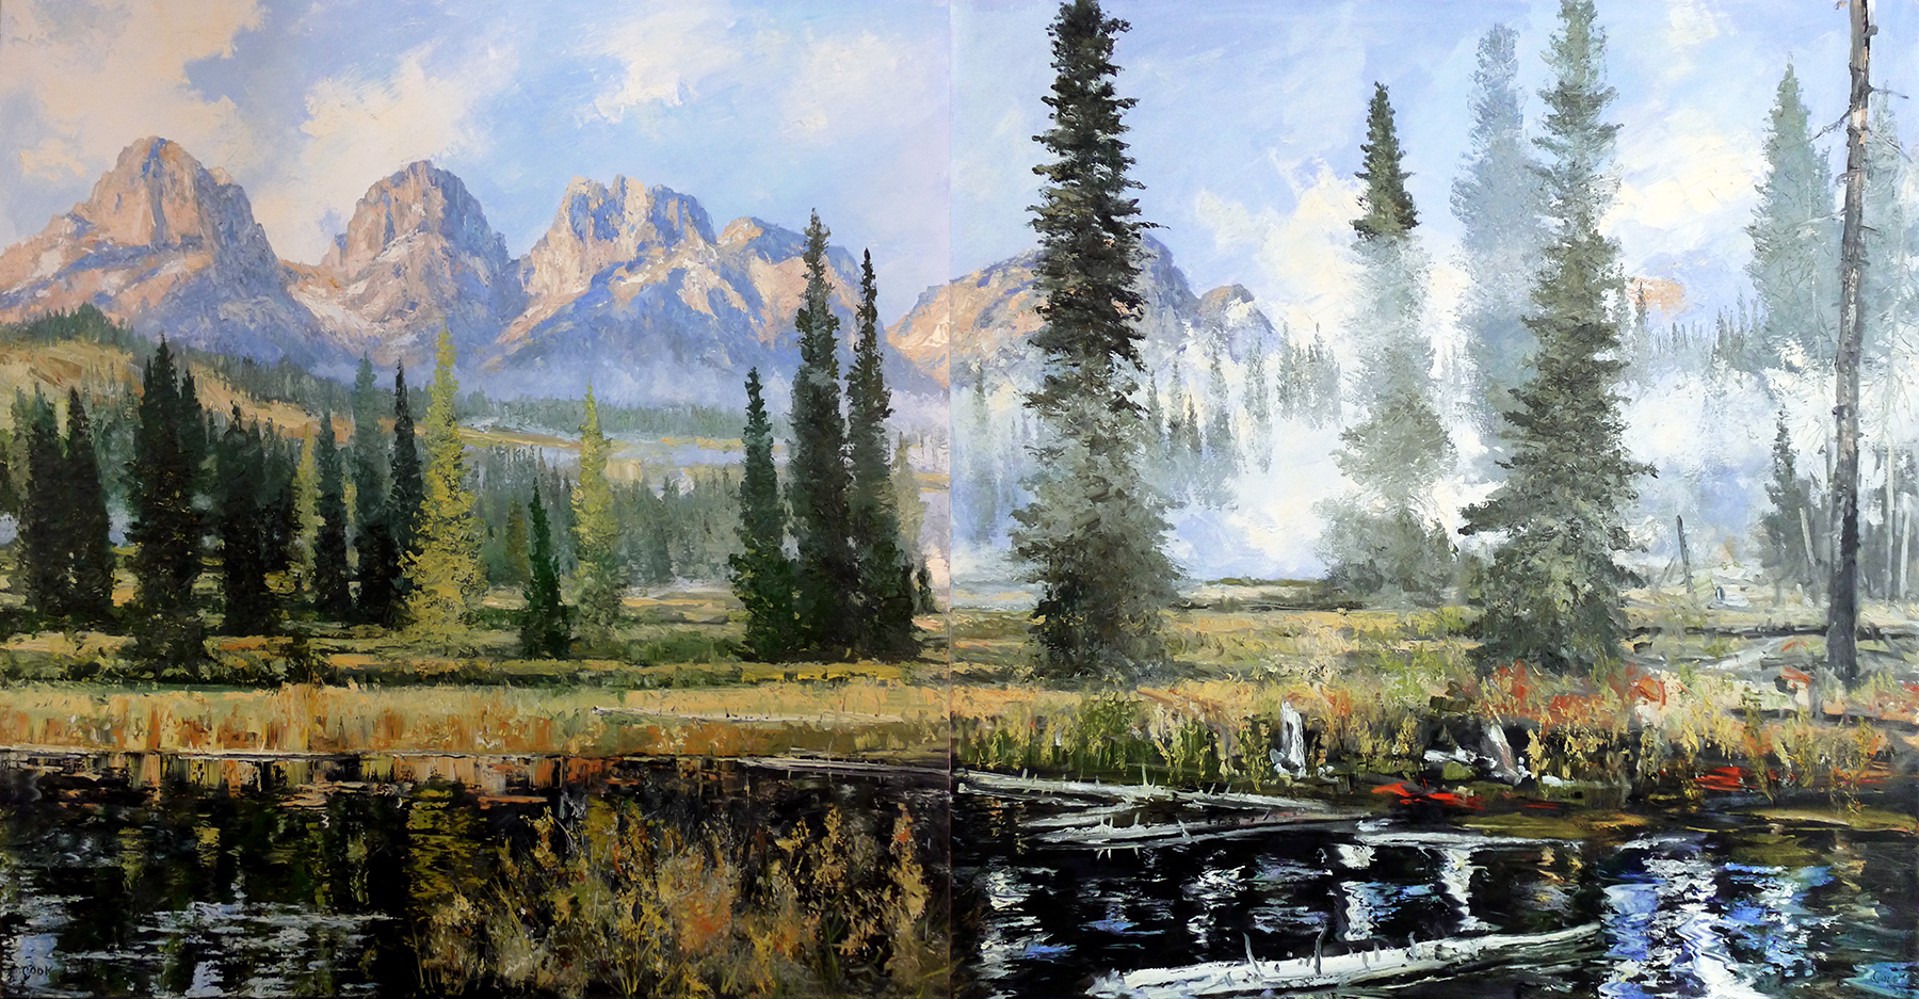 Sawtooth Morning Mist (Diptych) by James Cook